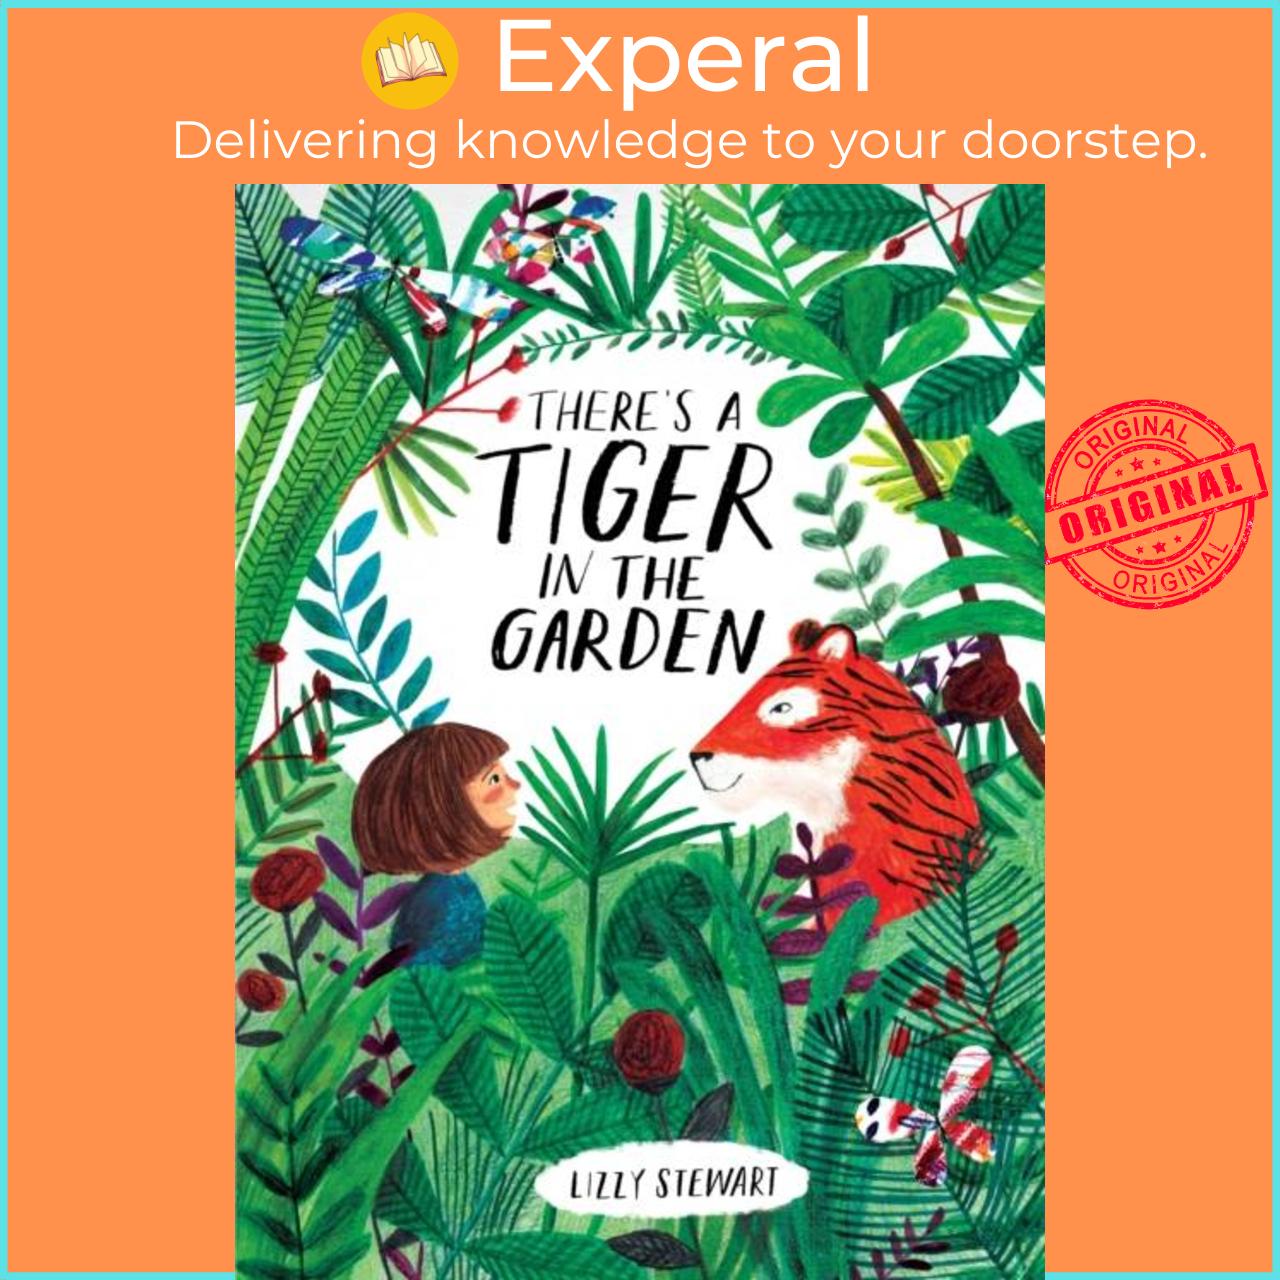 Sách - There's a Tiger in the Garden by Lizzy Stewart (UK edition, paperback)